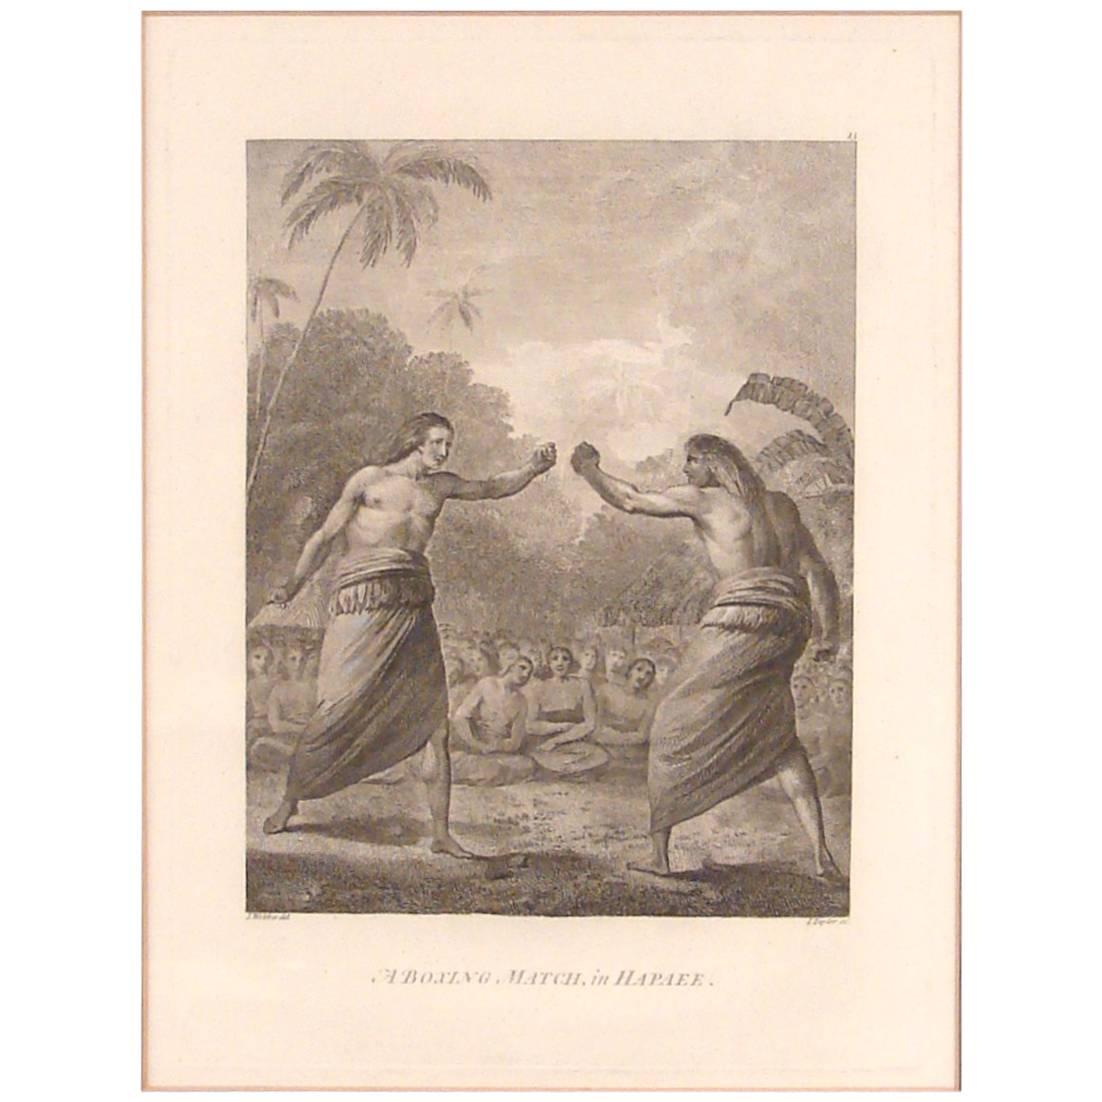 Copper Engraving "Boxing Match in Hapaee from Cook's Voyages" after John Webber